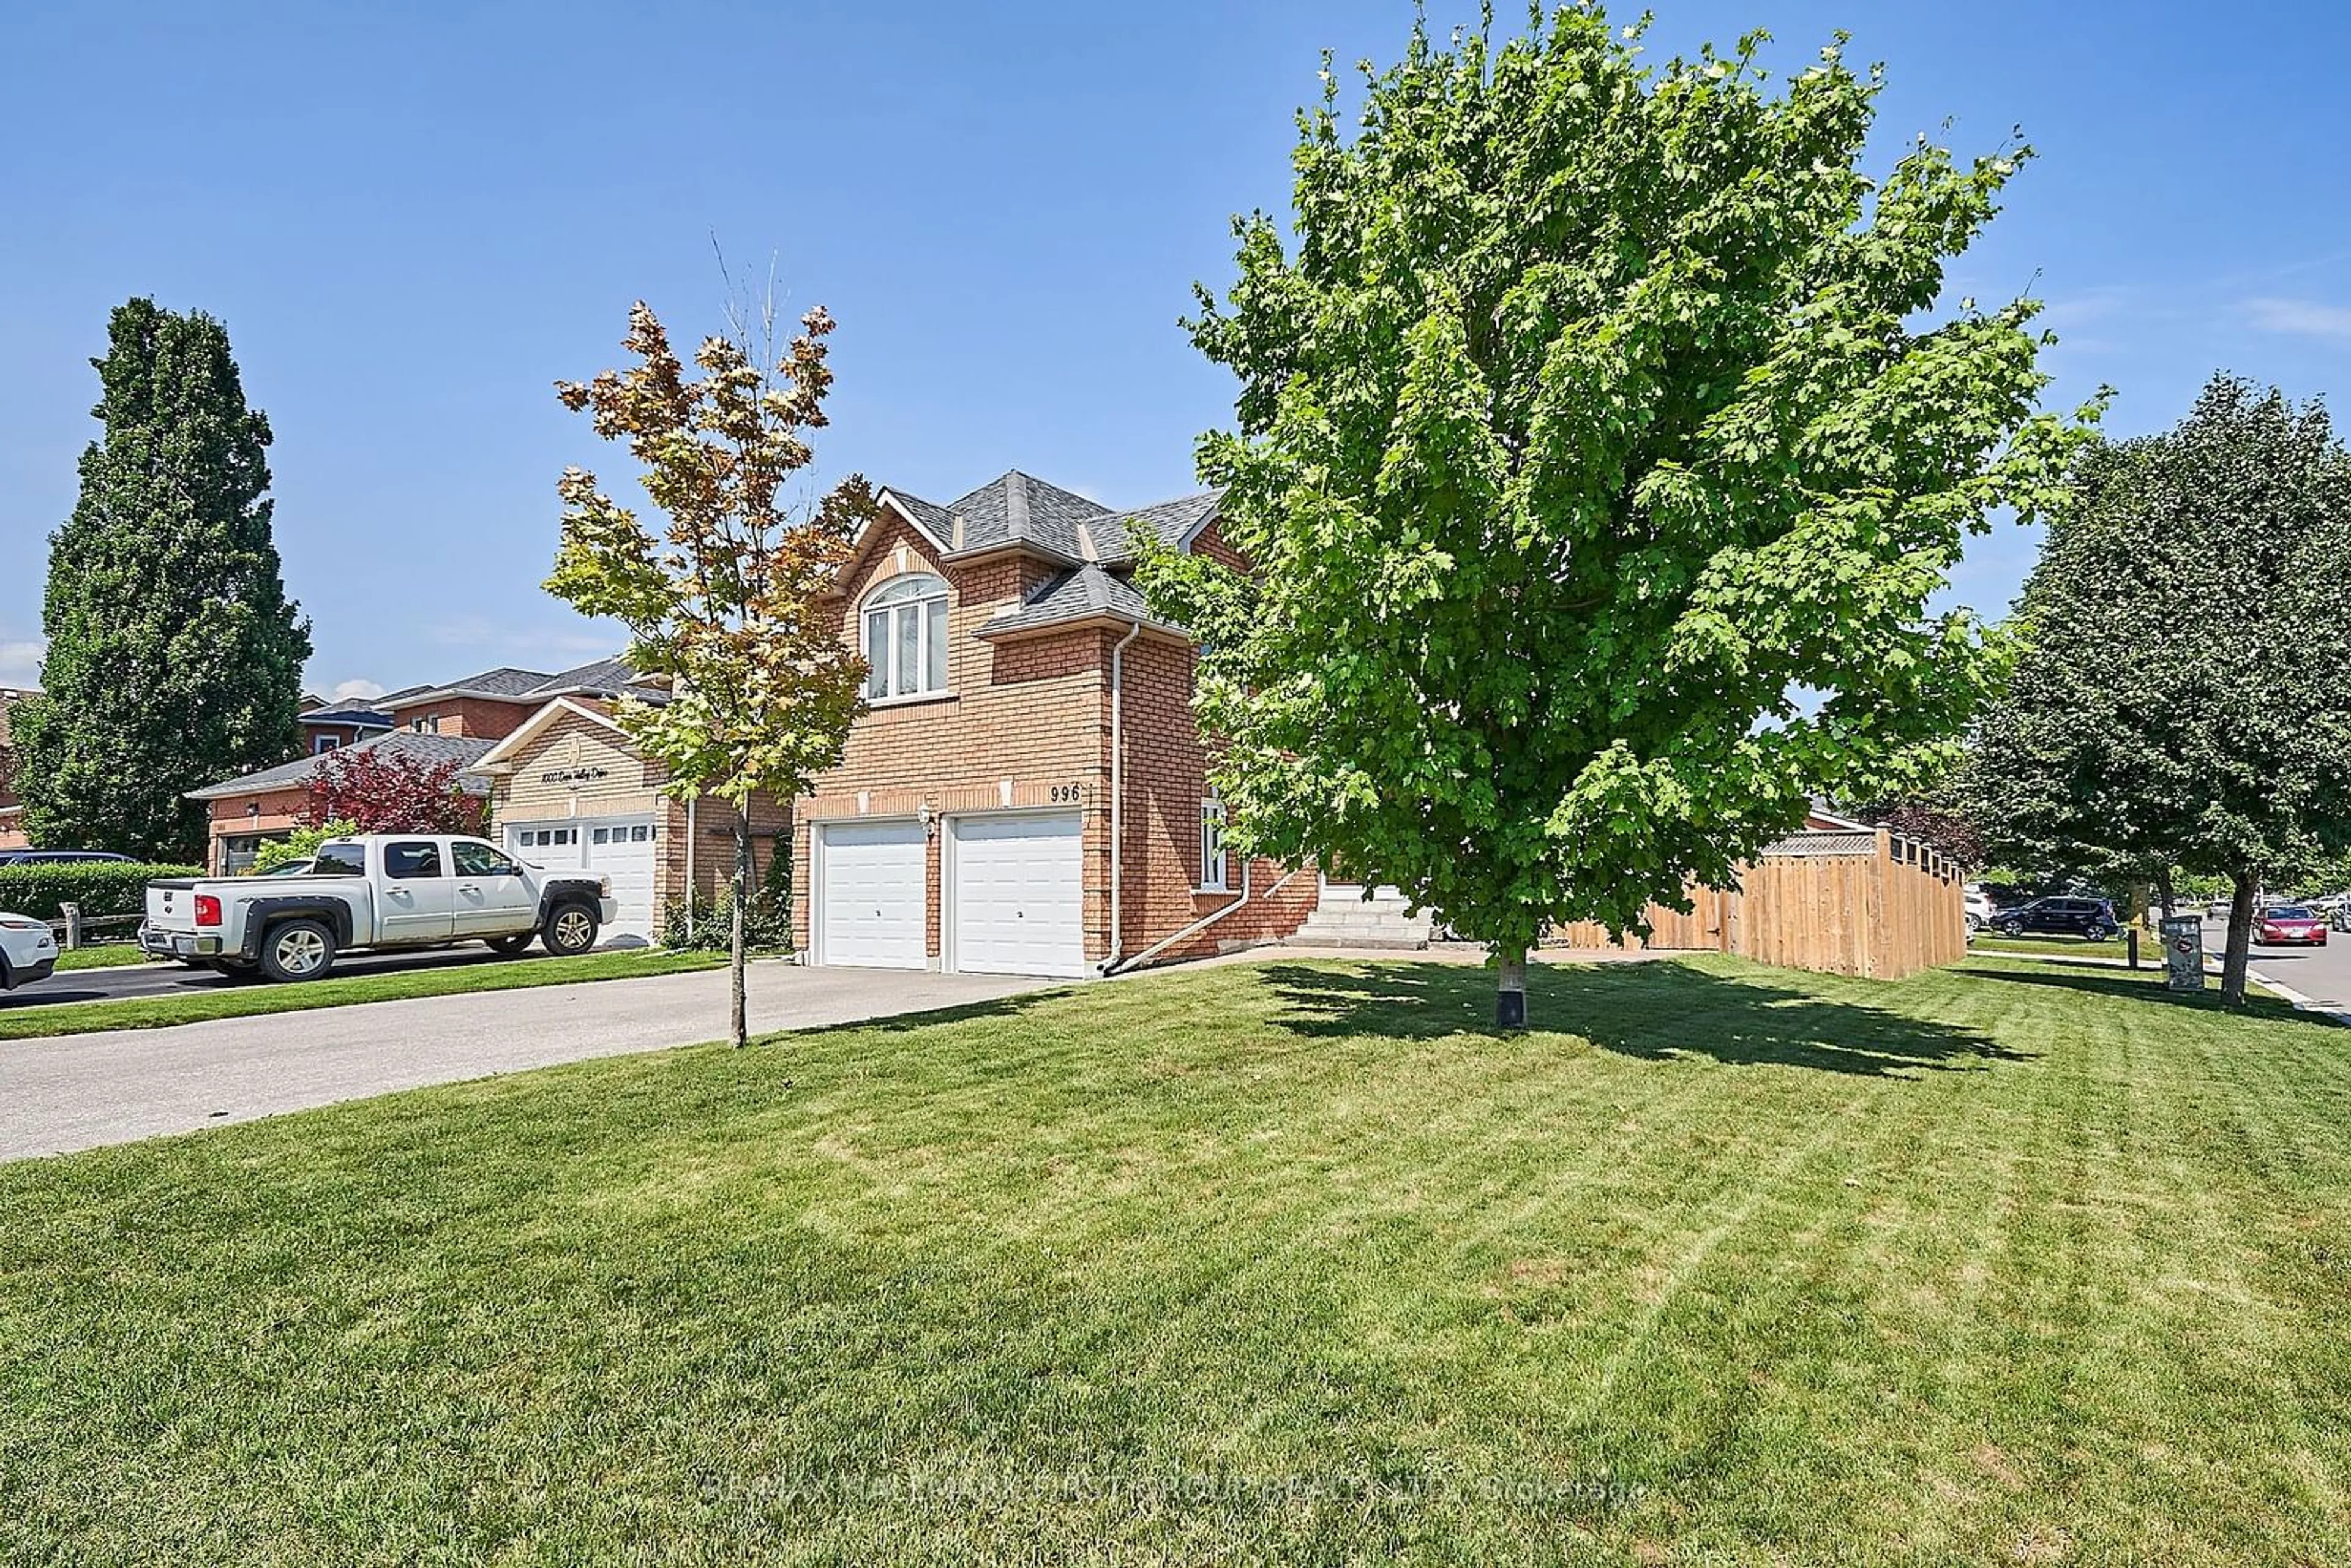 Frontside or backside of a home for 996 Deer Valley Dr, Oshawa Ontario L1J 8N2